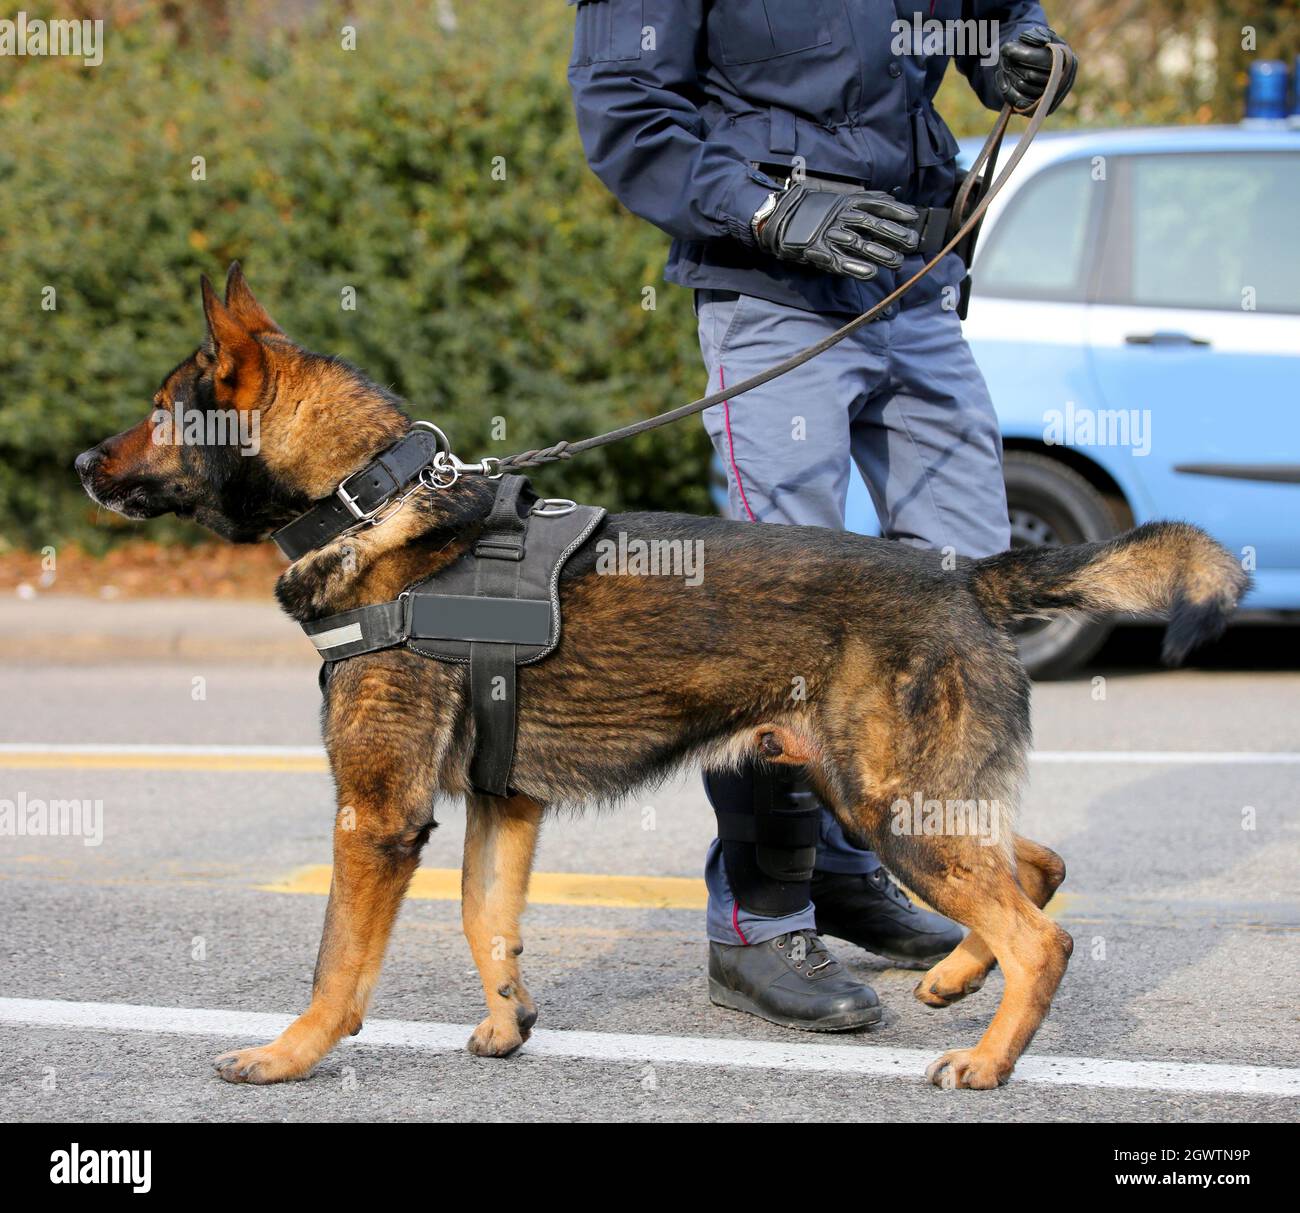 Dog Canine Unit Of The Police Called K-9 To Identify The Explosives Stock Photo